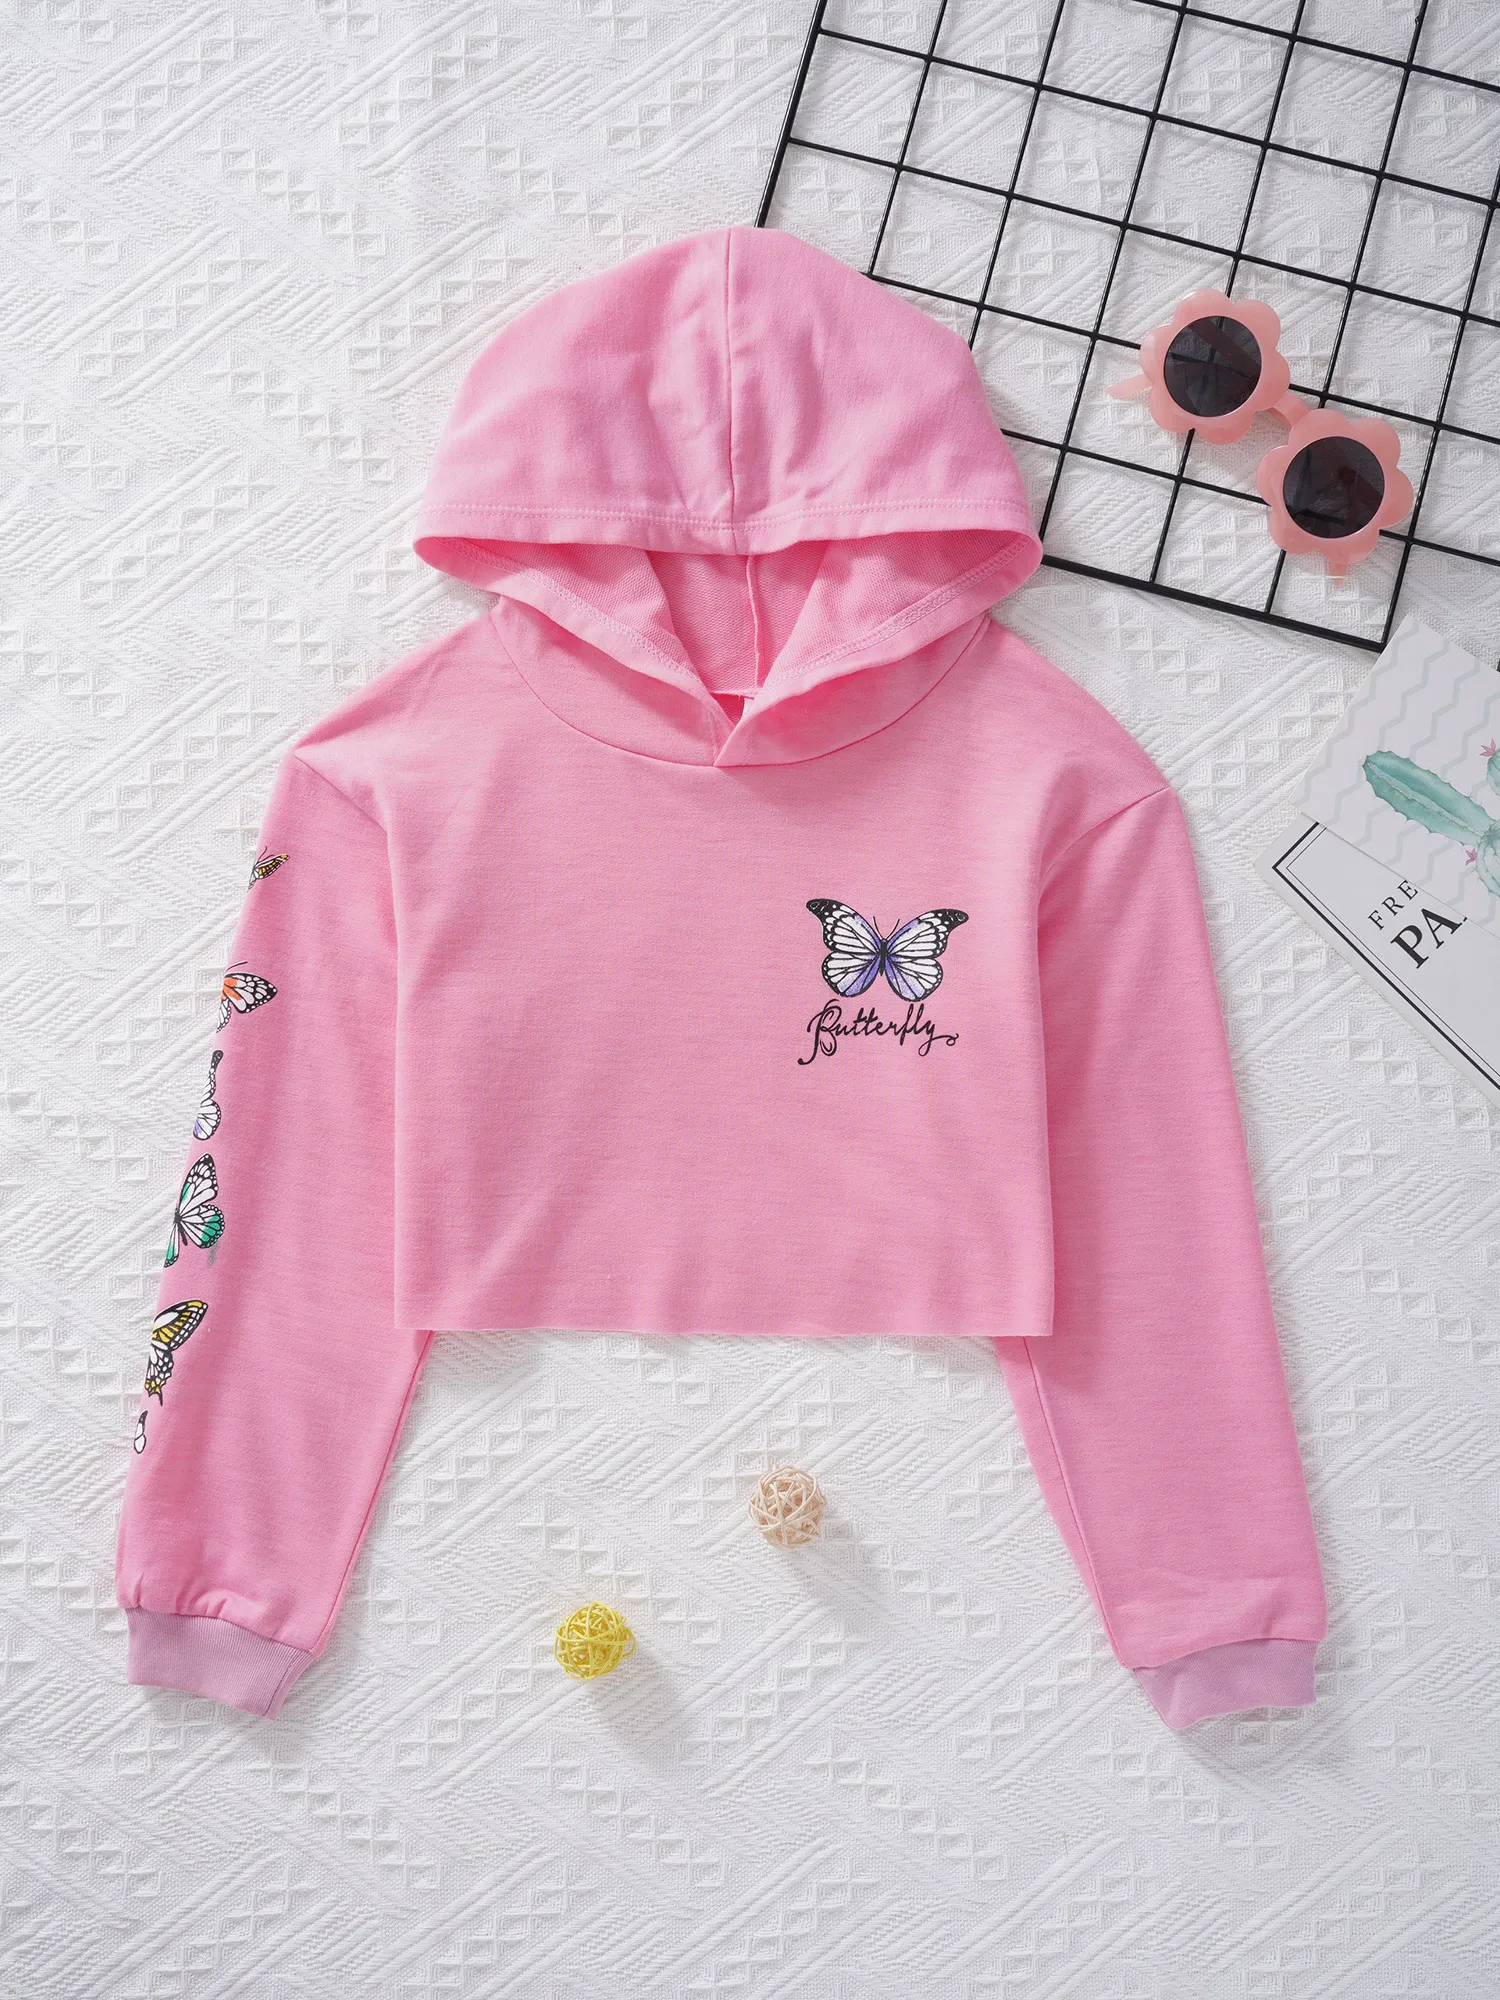 Hip Hop Girls Clothing Kids Hooded Sweatshirt Cotton Long Sleeves Cropped T-Shirts Tops Modern Jazz Dance Gym Workout Clothes baby hooded shirt